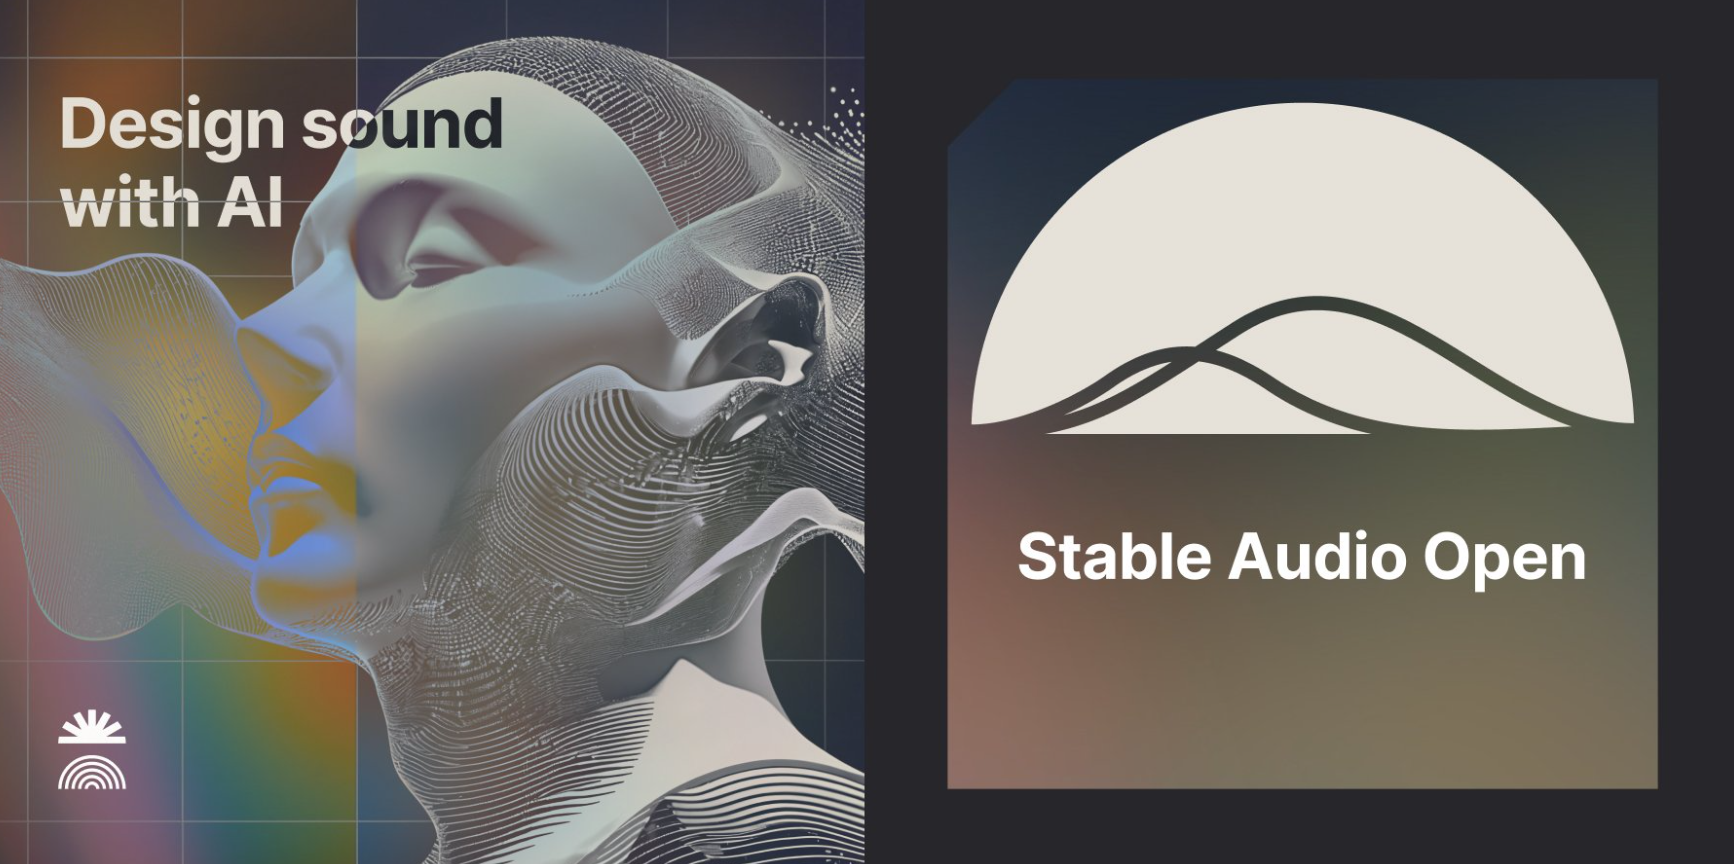 Stable Audio Open is like the Stable Diffusion of sound design, and it's completely open source